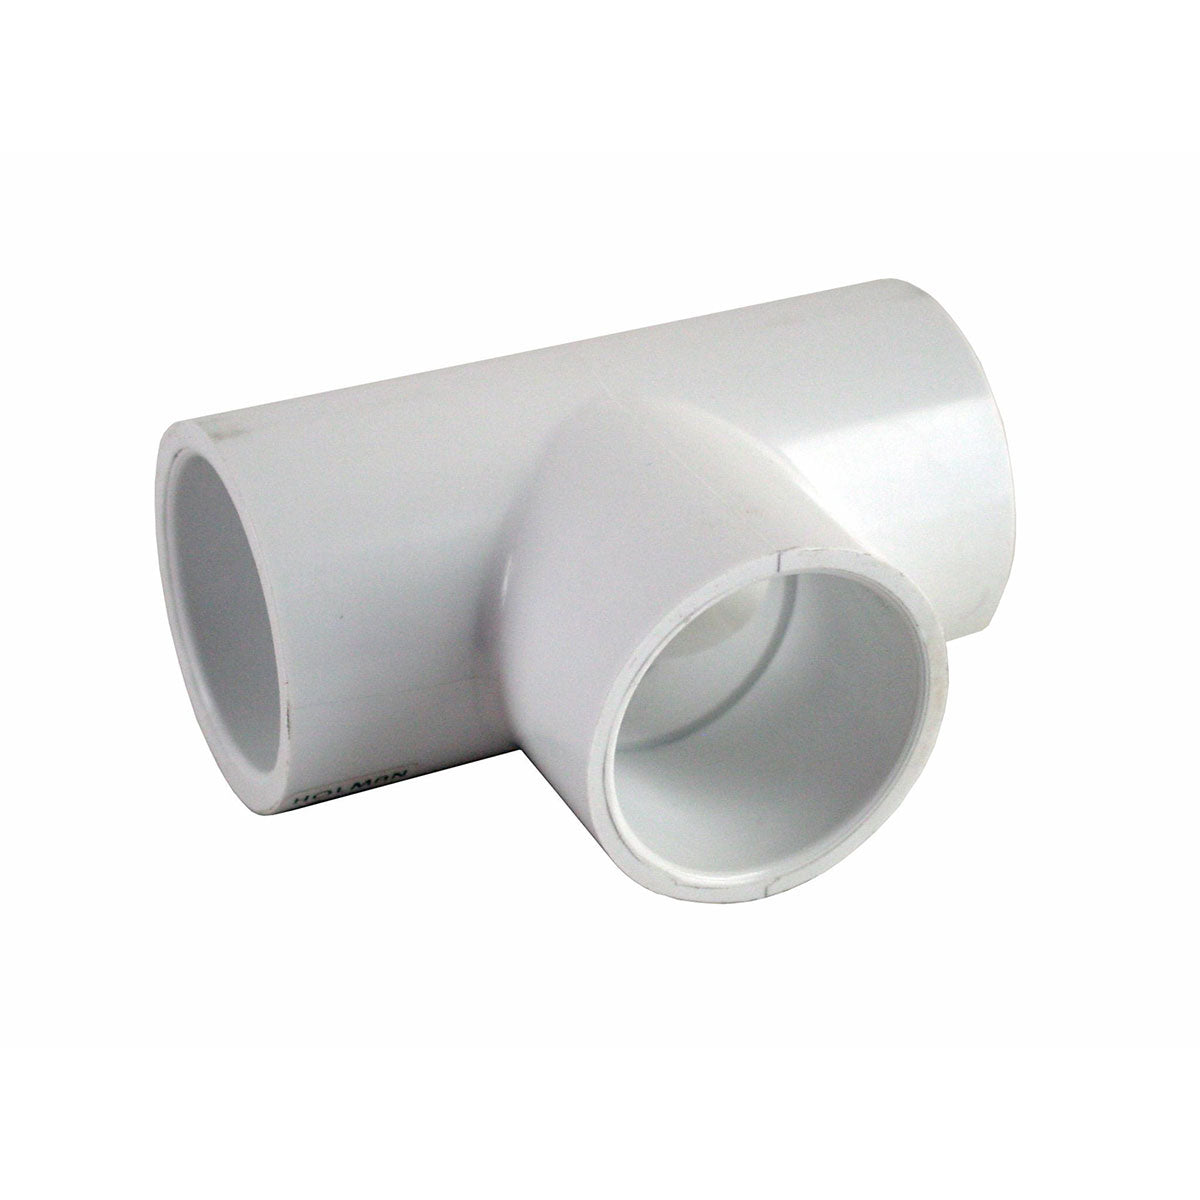 PVC Fitting Tee CL18 CAT19 AS1477